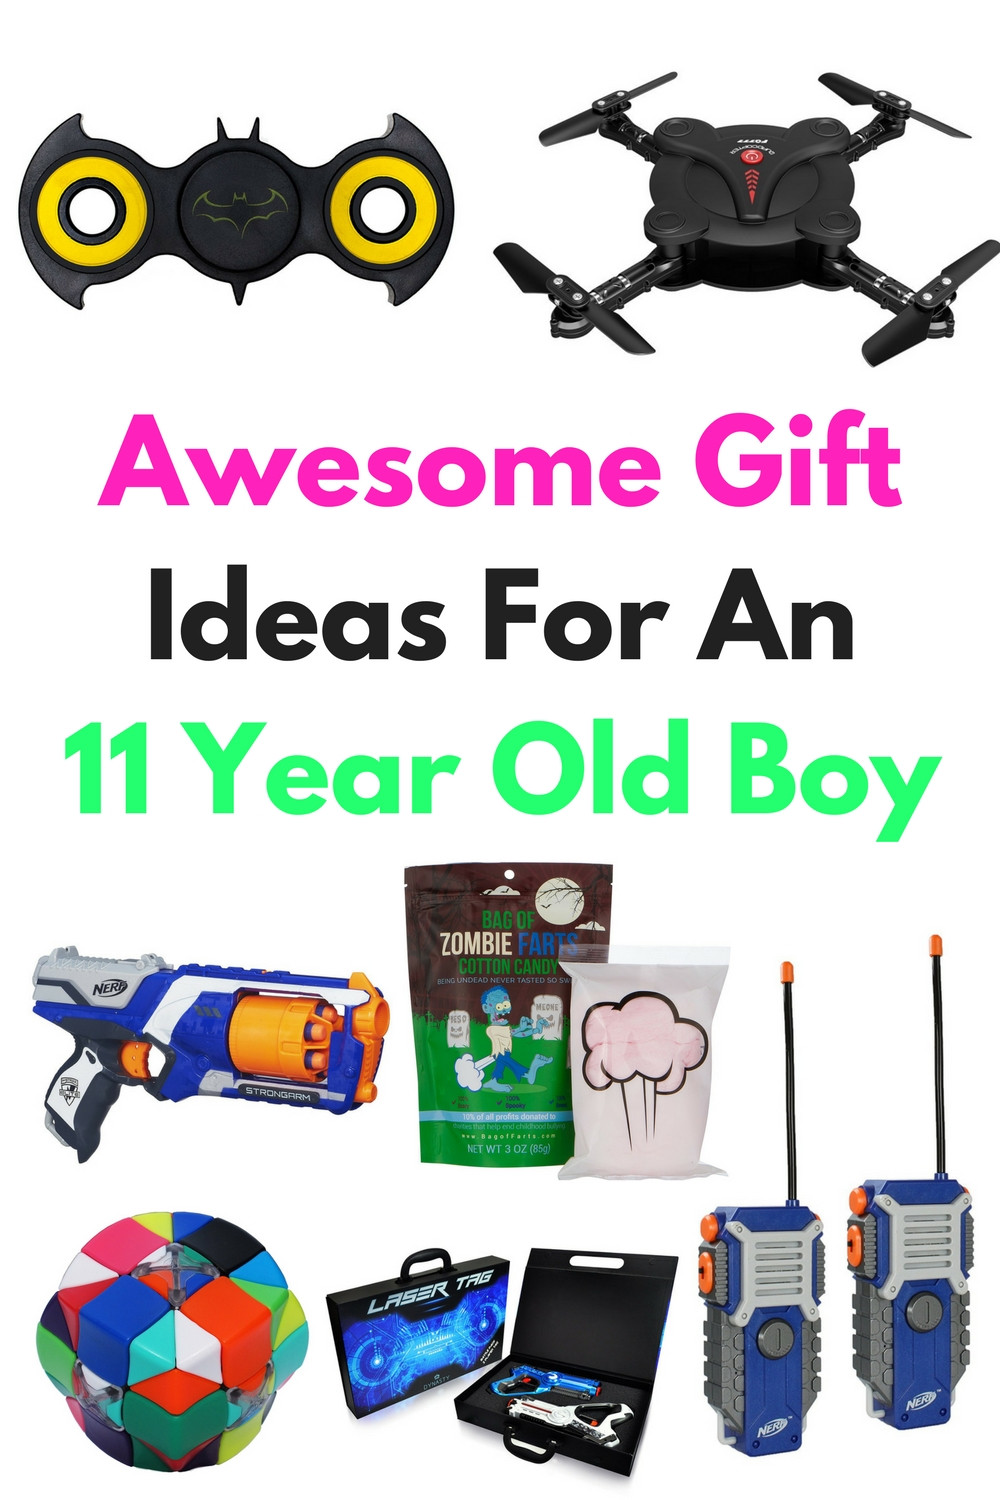 Gift Ideas For 11 Year Old Boys
 Awesome Gift Ideas For An 11 Year Old Boy